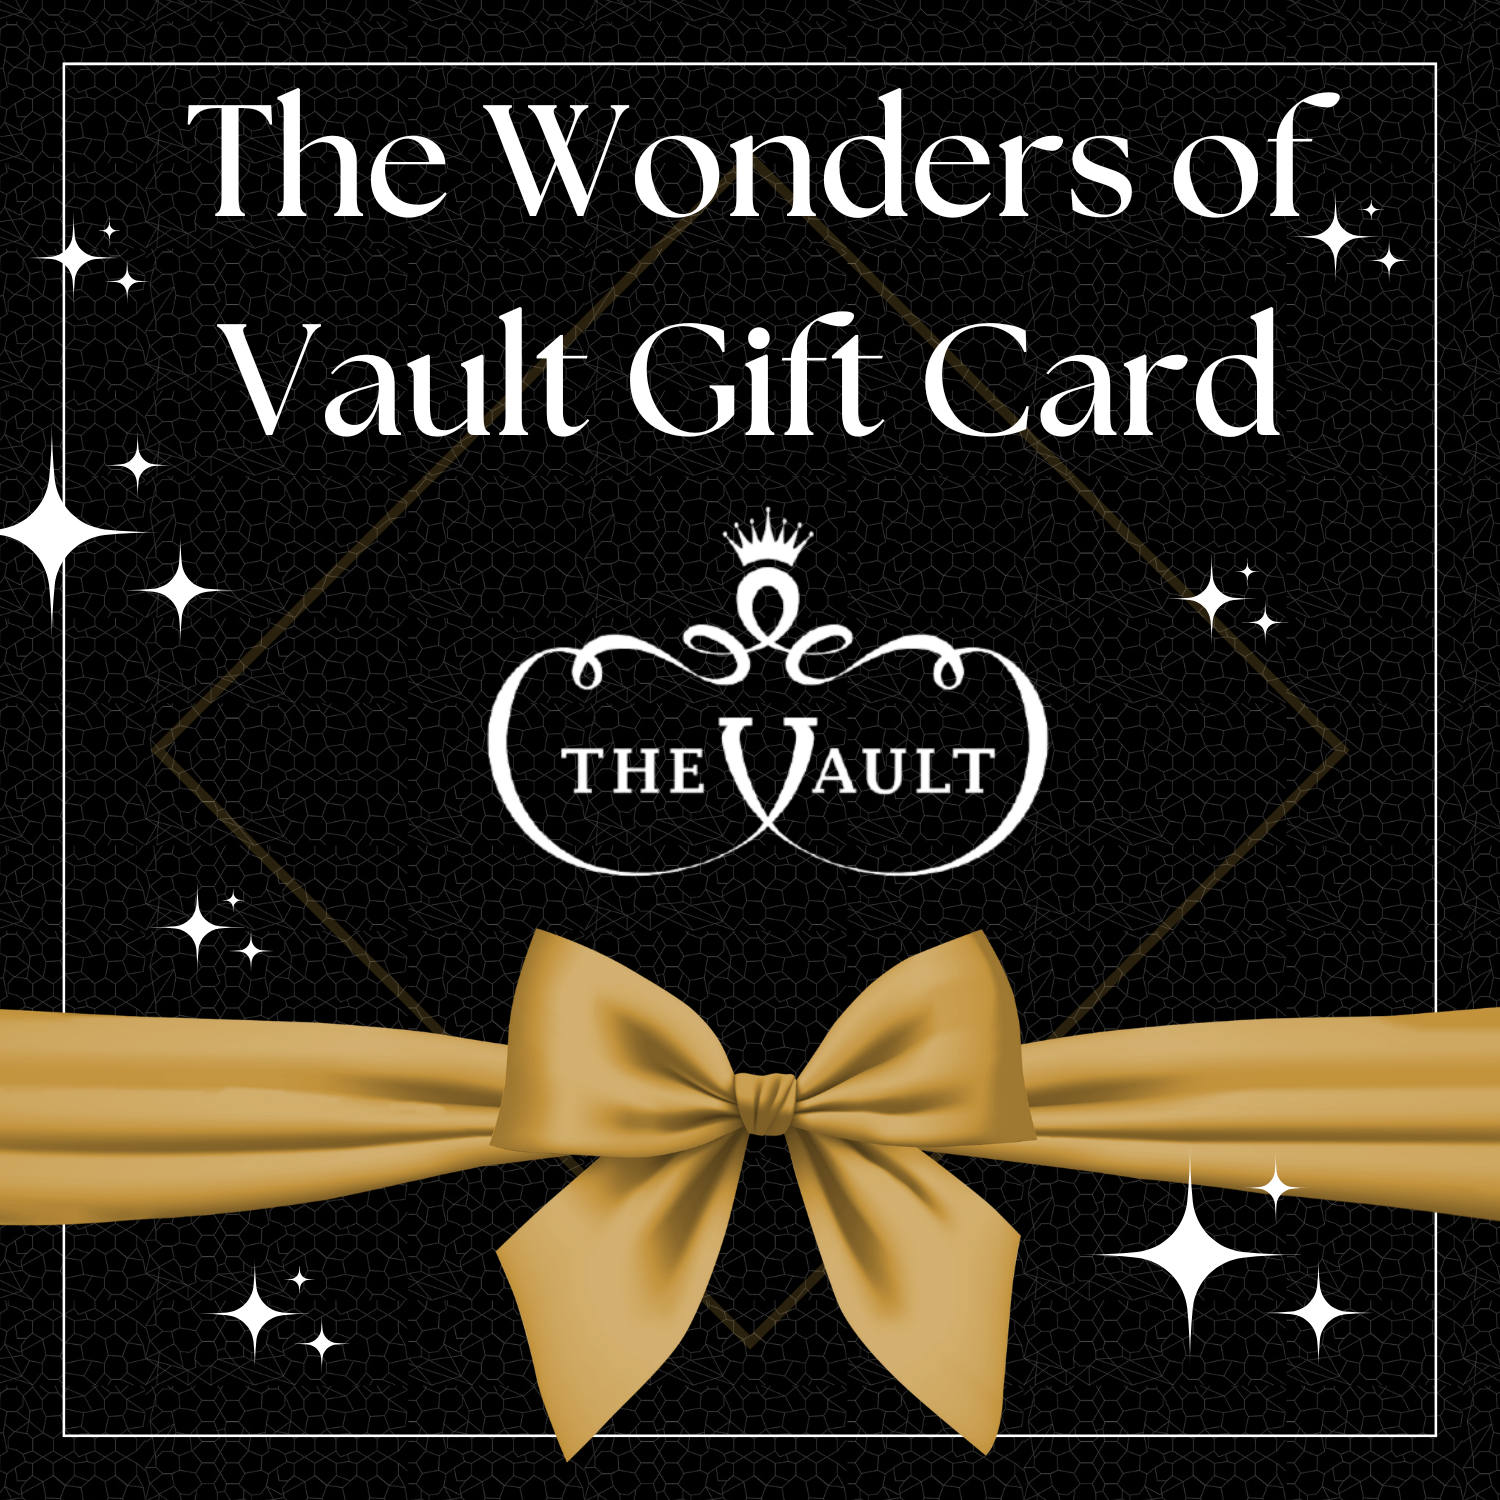 The Wonders of Vault Gift Card